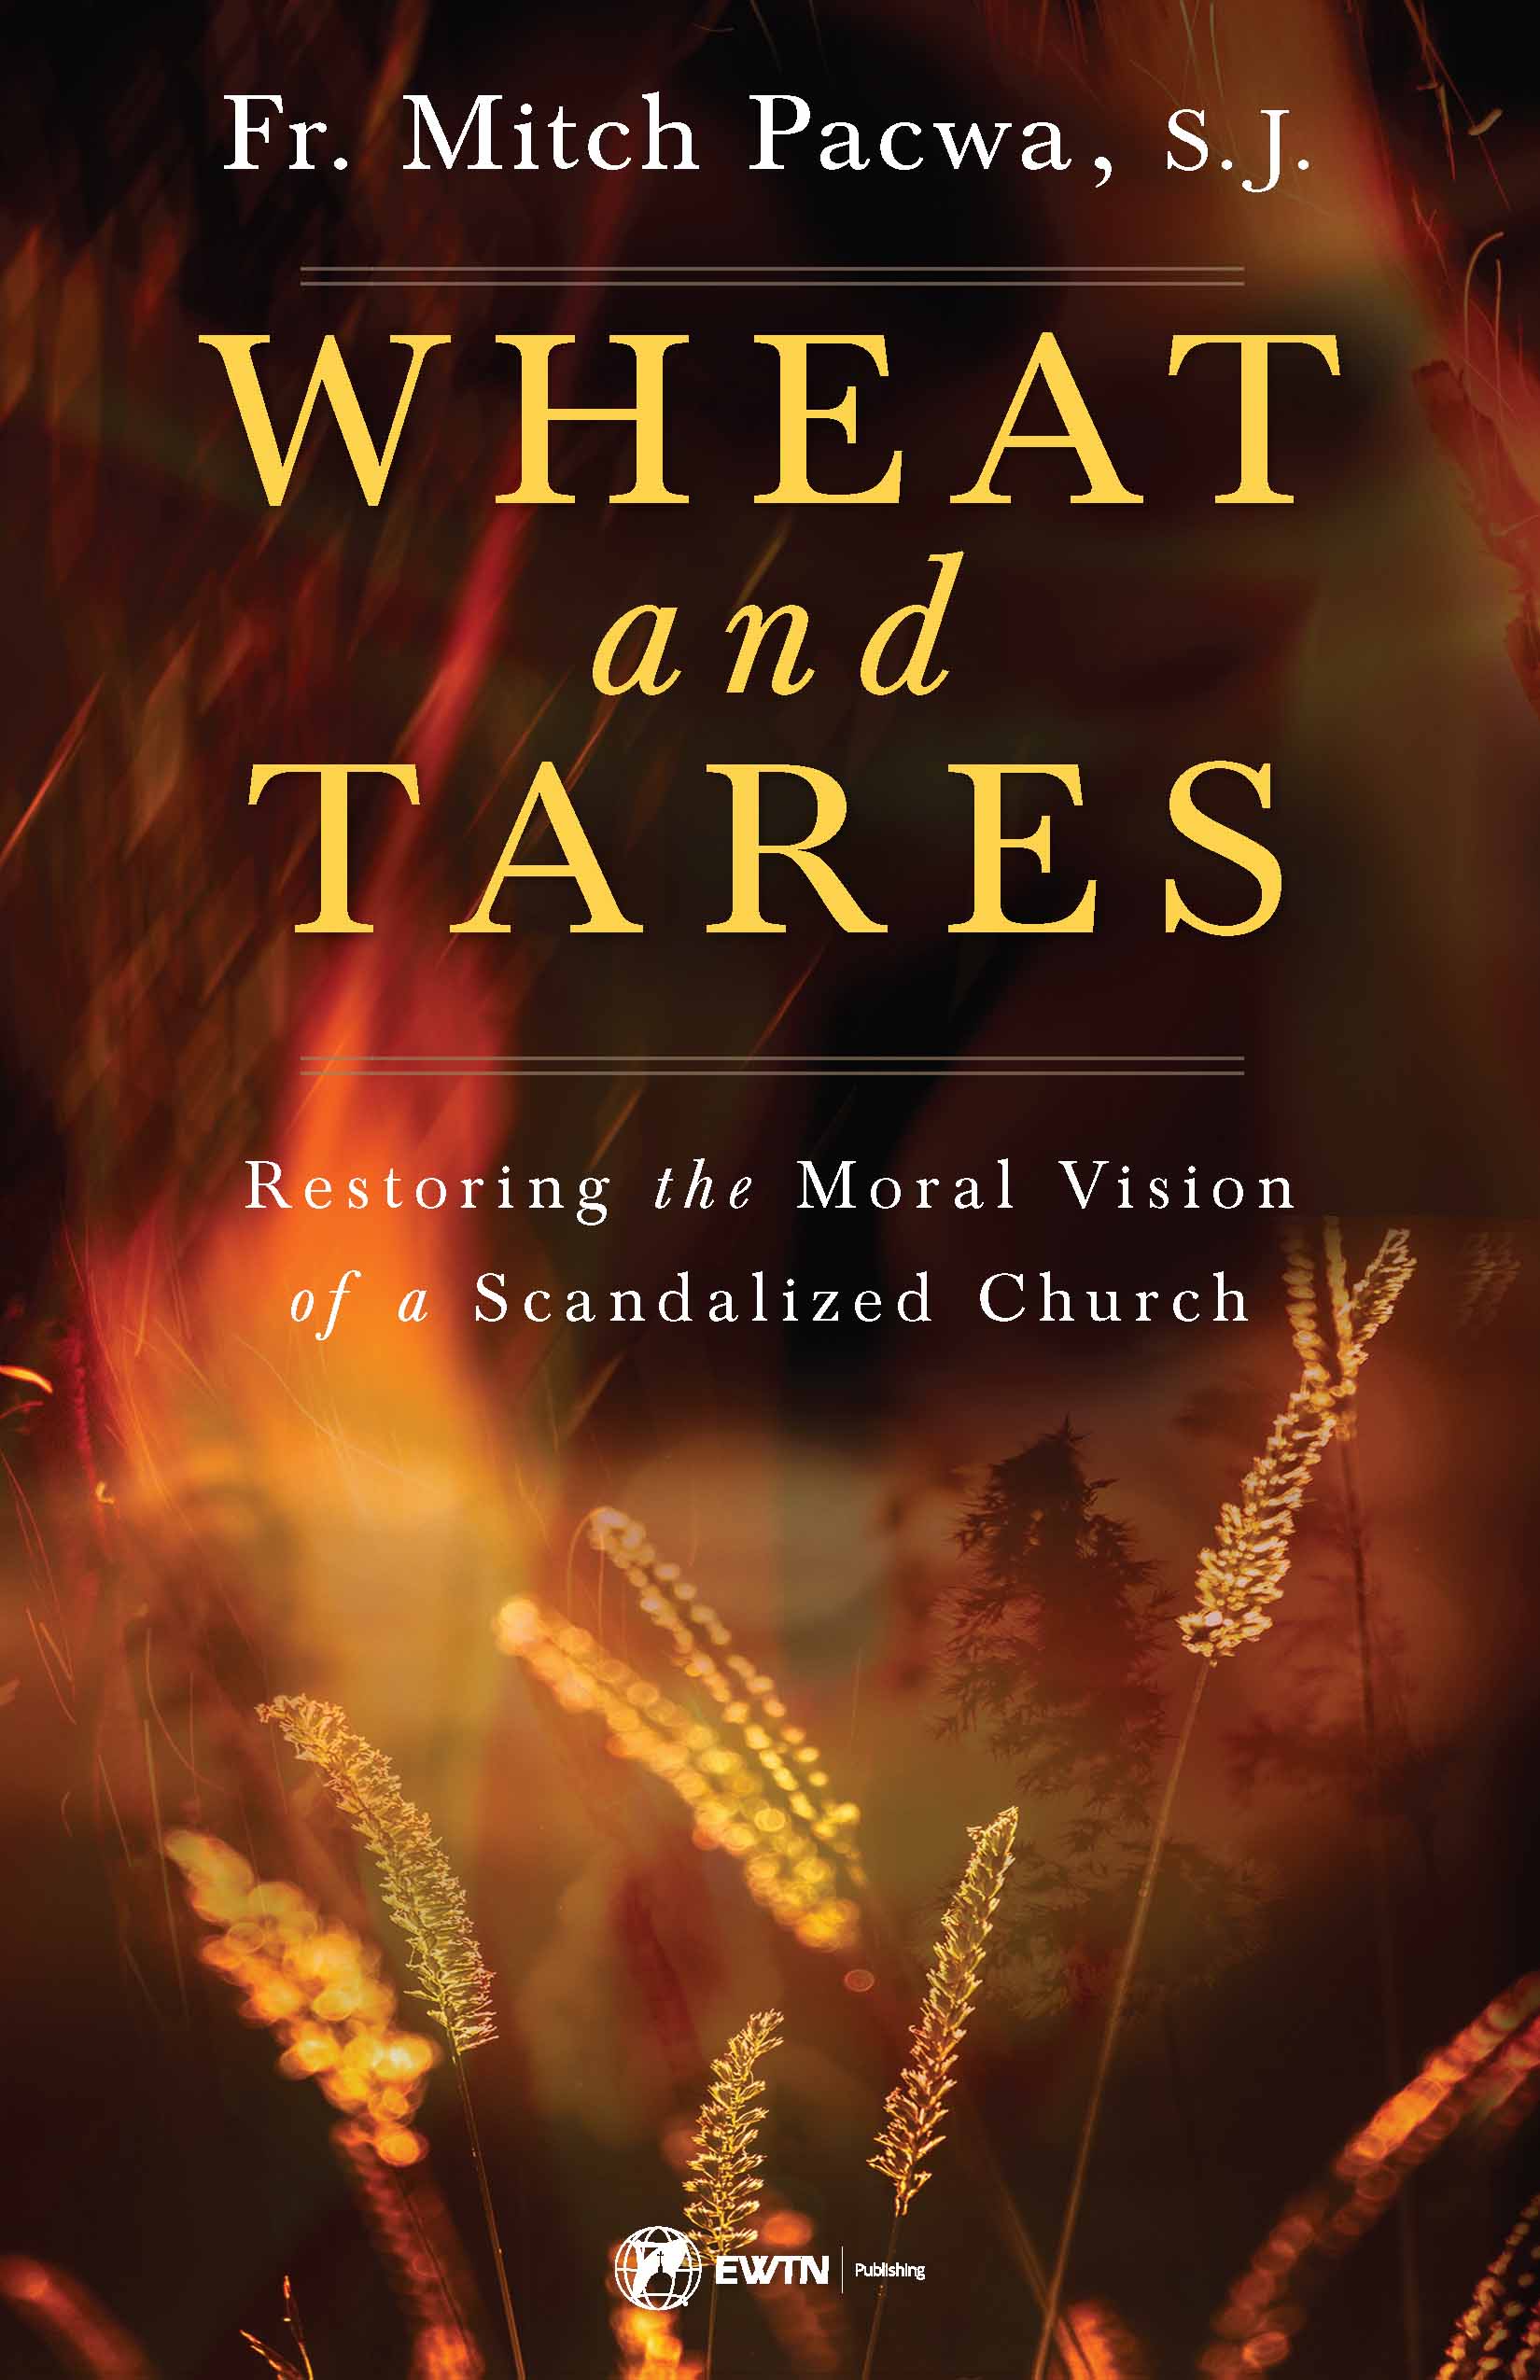 Wheat and Tares  Restoring the Moral Vision of a Scandalized Church / Fr Mitch Pacwa SJ